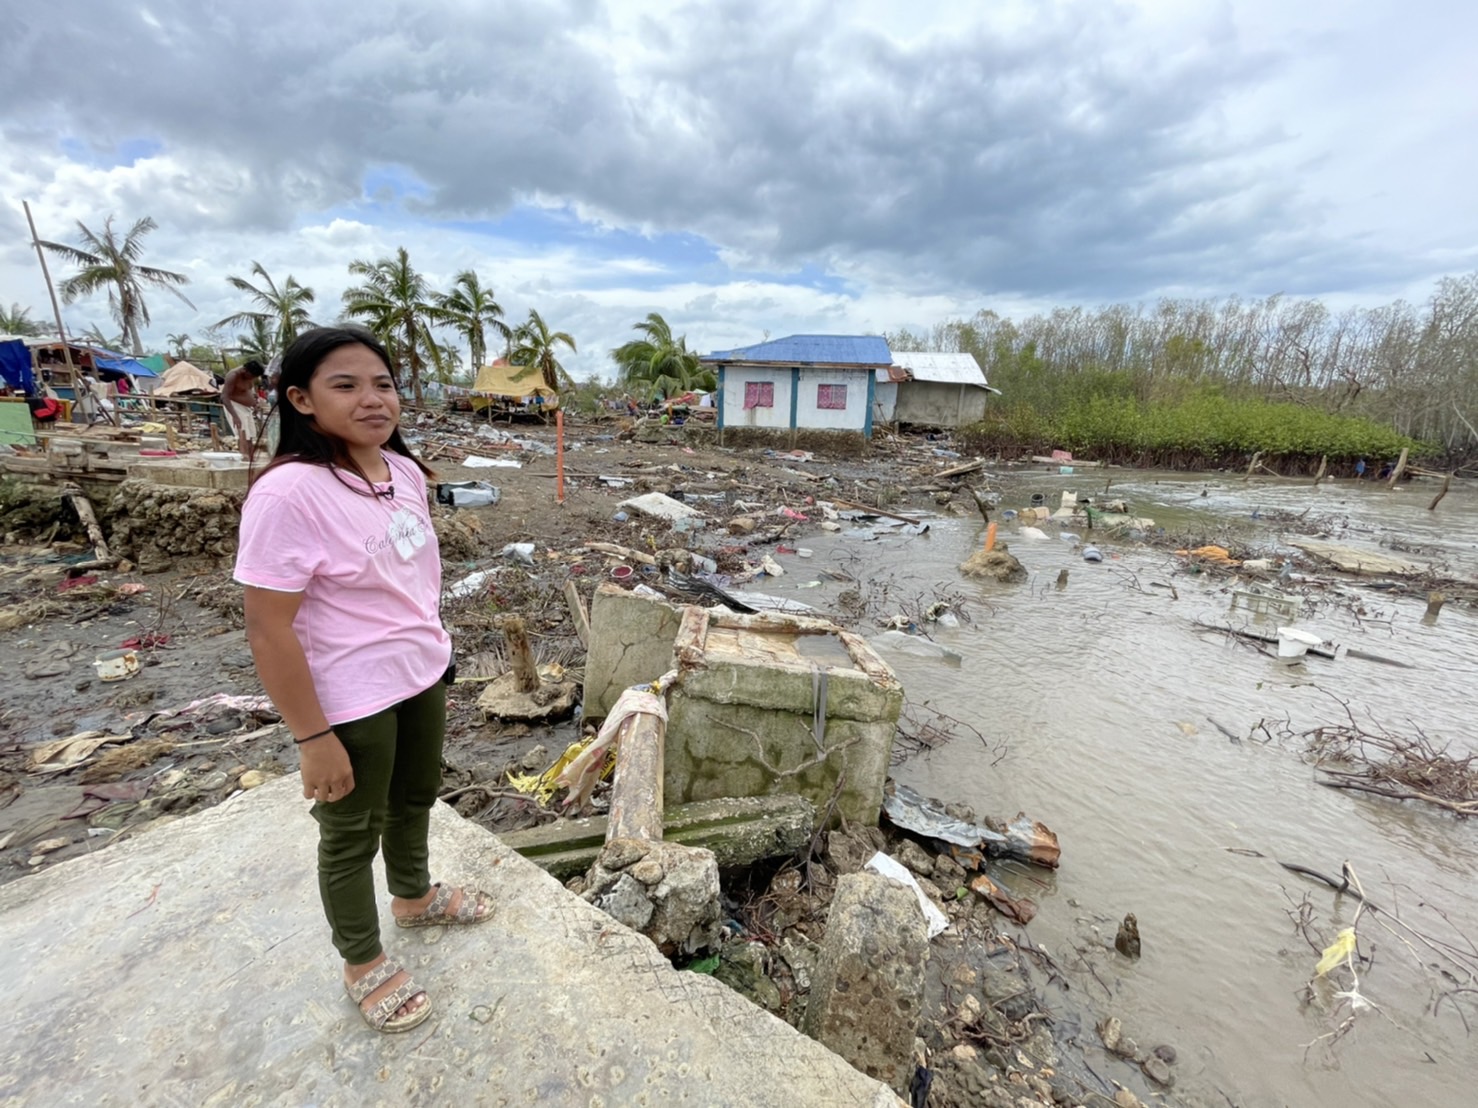 Feljoy Torreon stands on the cement flooring of her home, the only thing remaining of her family’s residence in Tinangnan, Tubigon, Bohol. 【Photo by Jeaneal Dando】